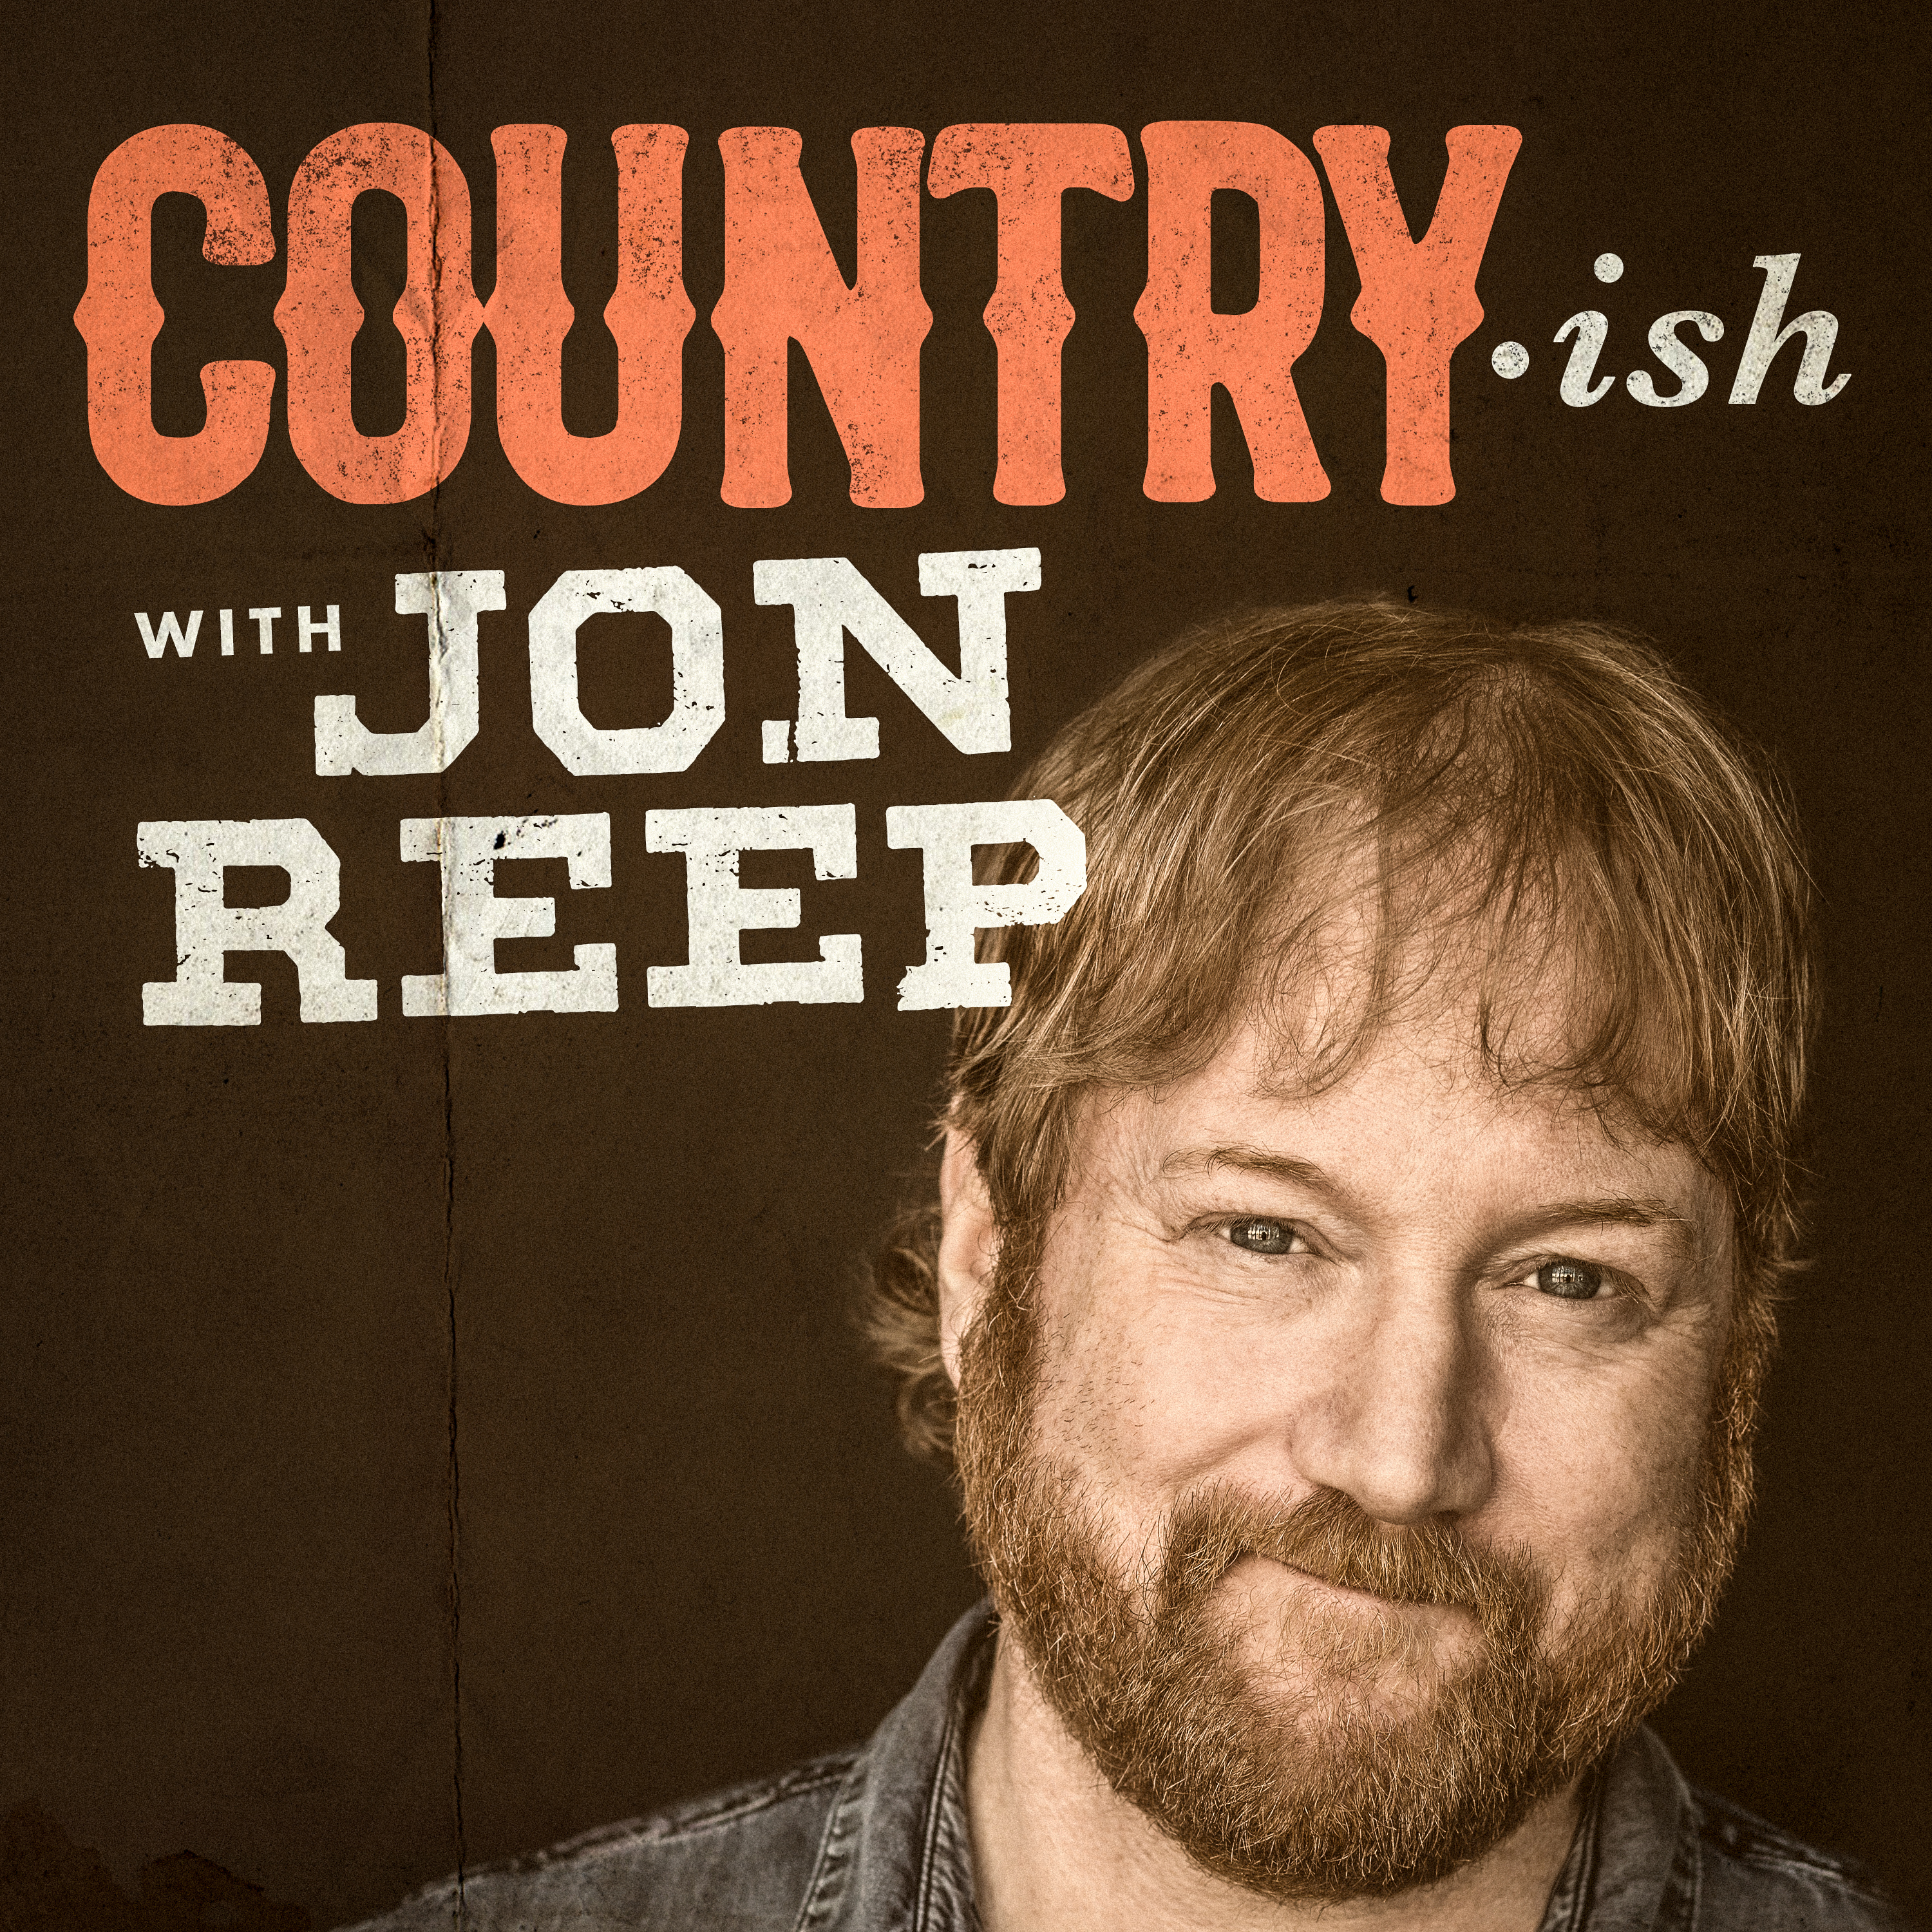 Country-ish Bonus Dish:  Live from the Jon Reep "Come Laugh Your Nassau'ff" Cruise